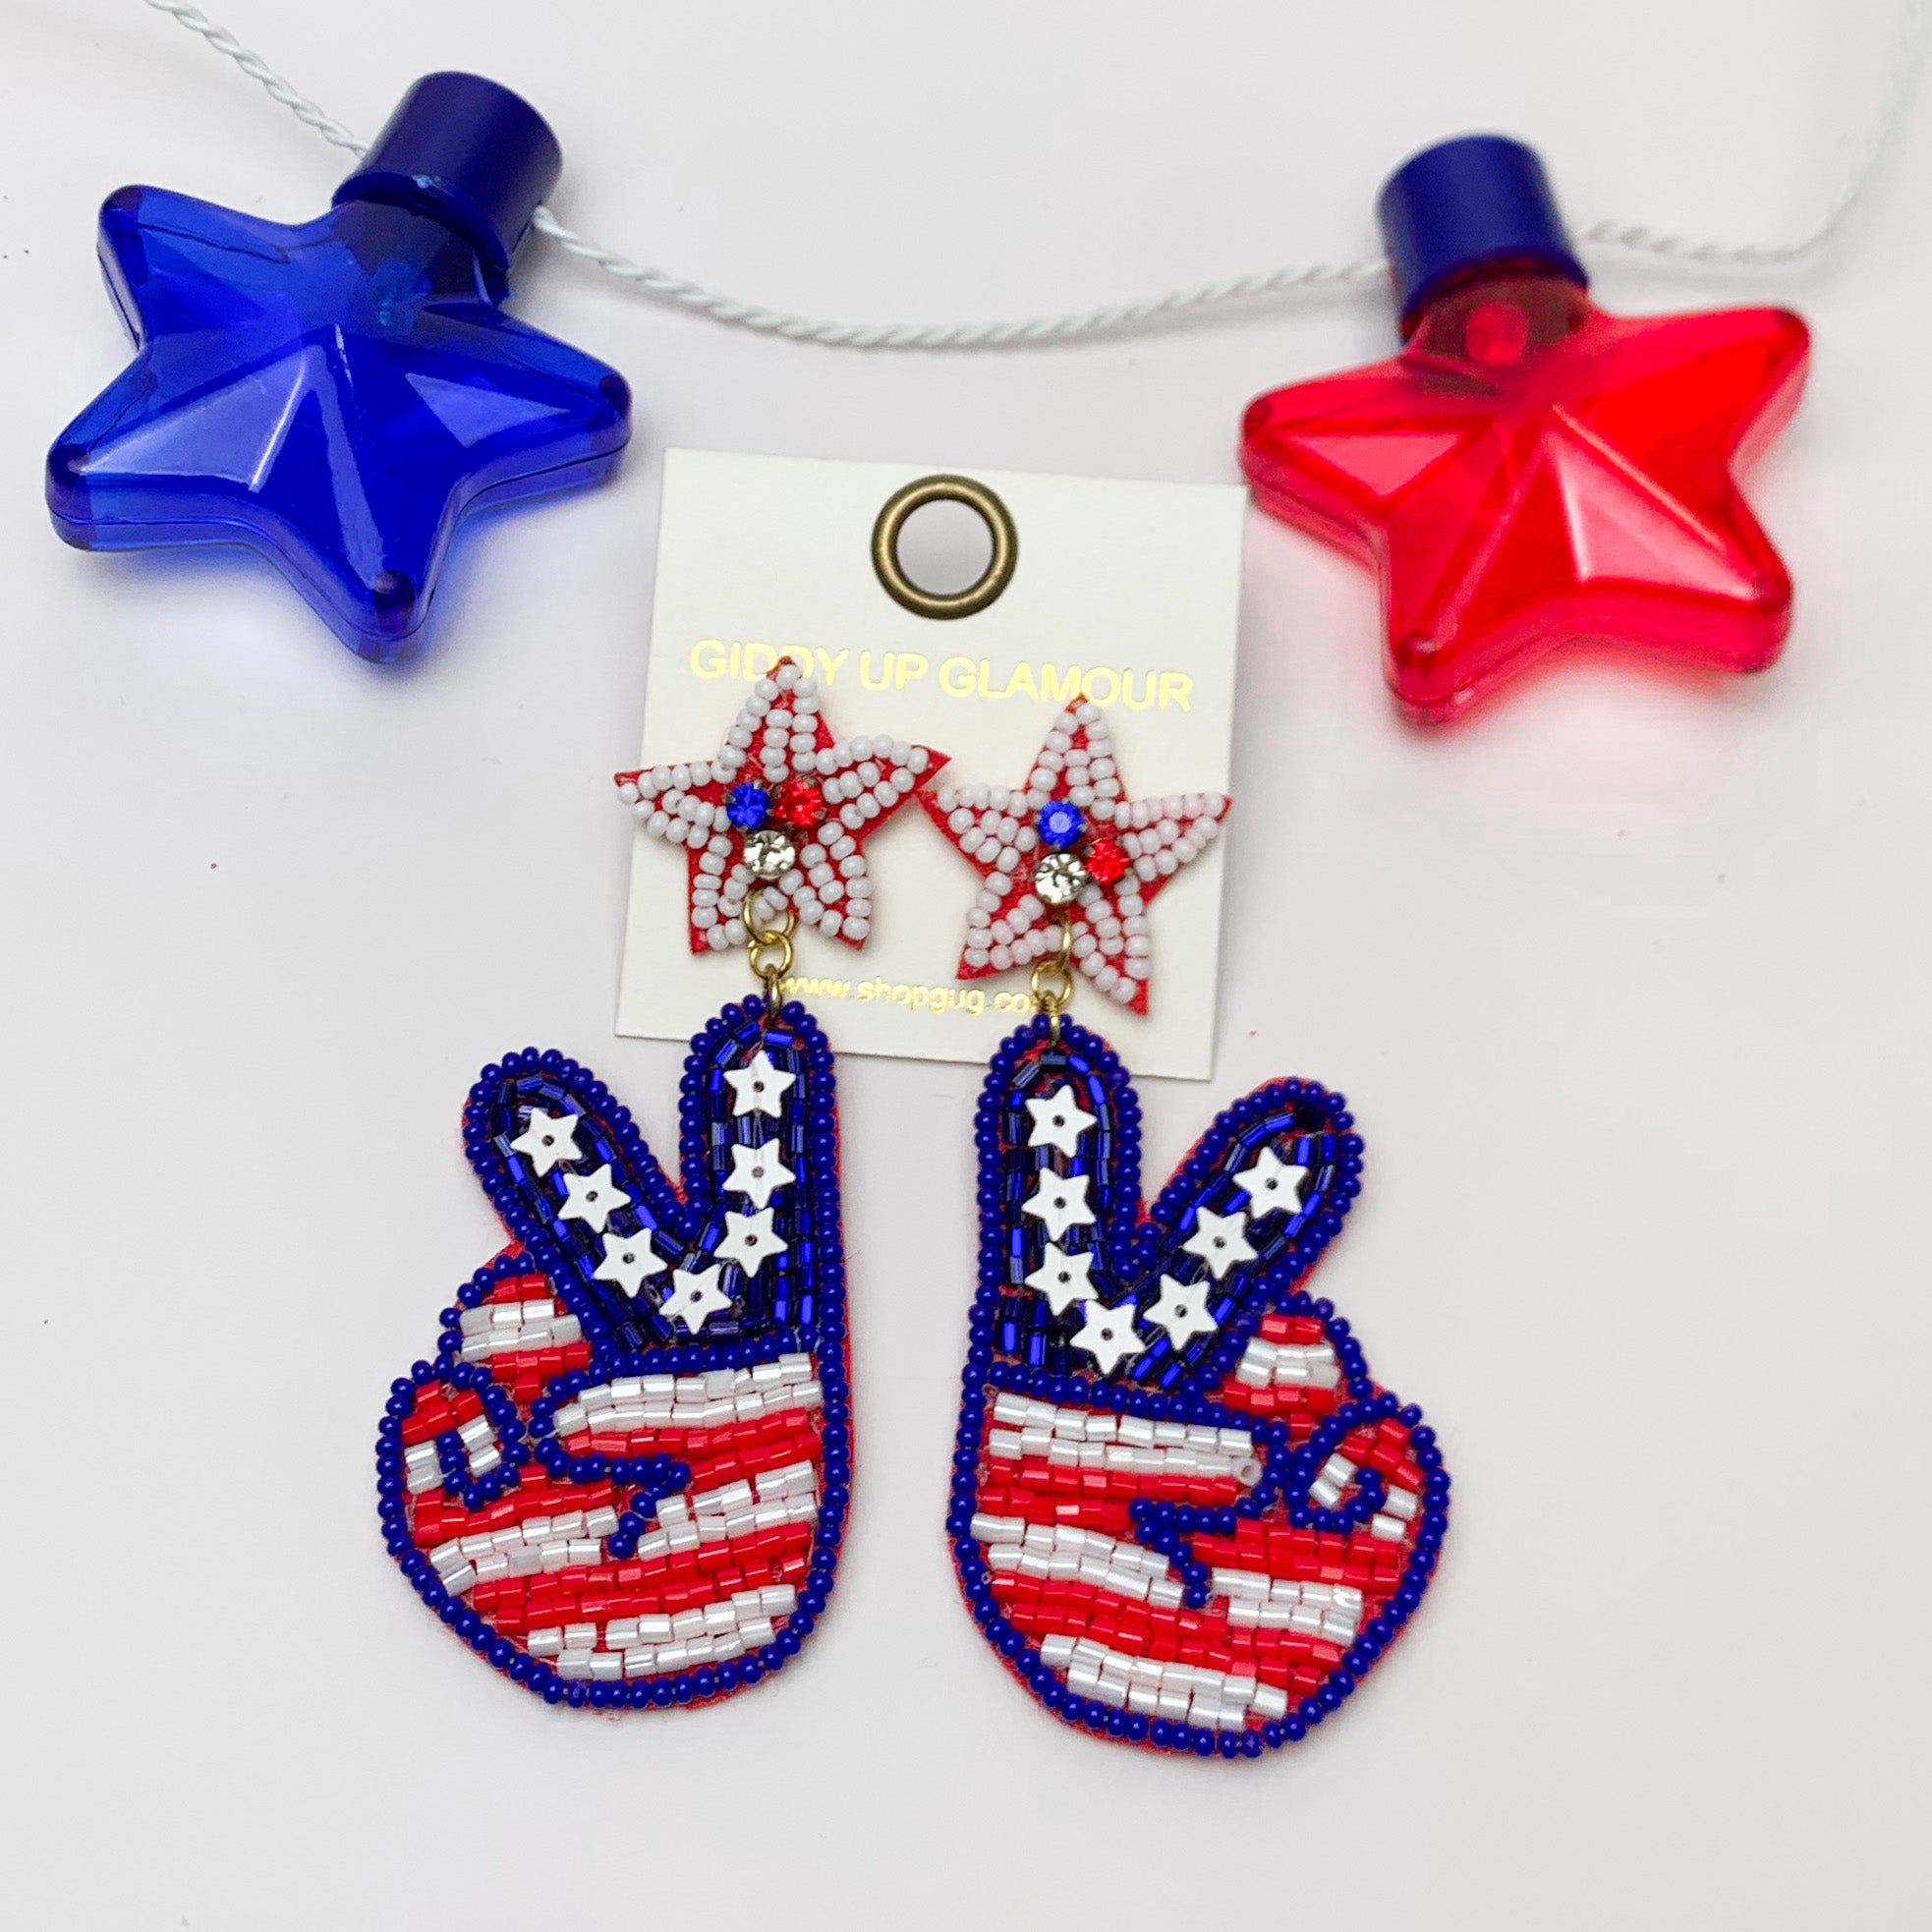 Peace Sign Beaded USA Themed Earrings. Pictured on a white background with a red and blue star above for decoration.